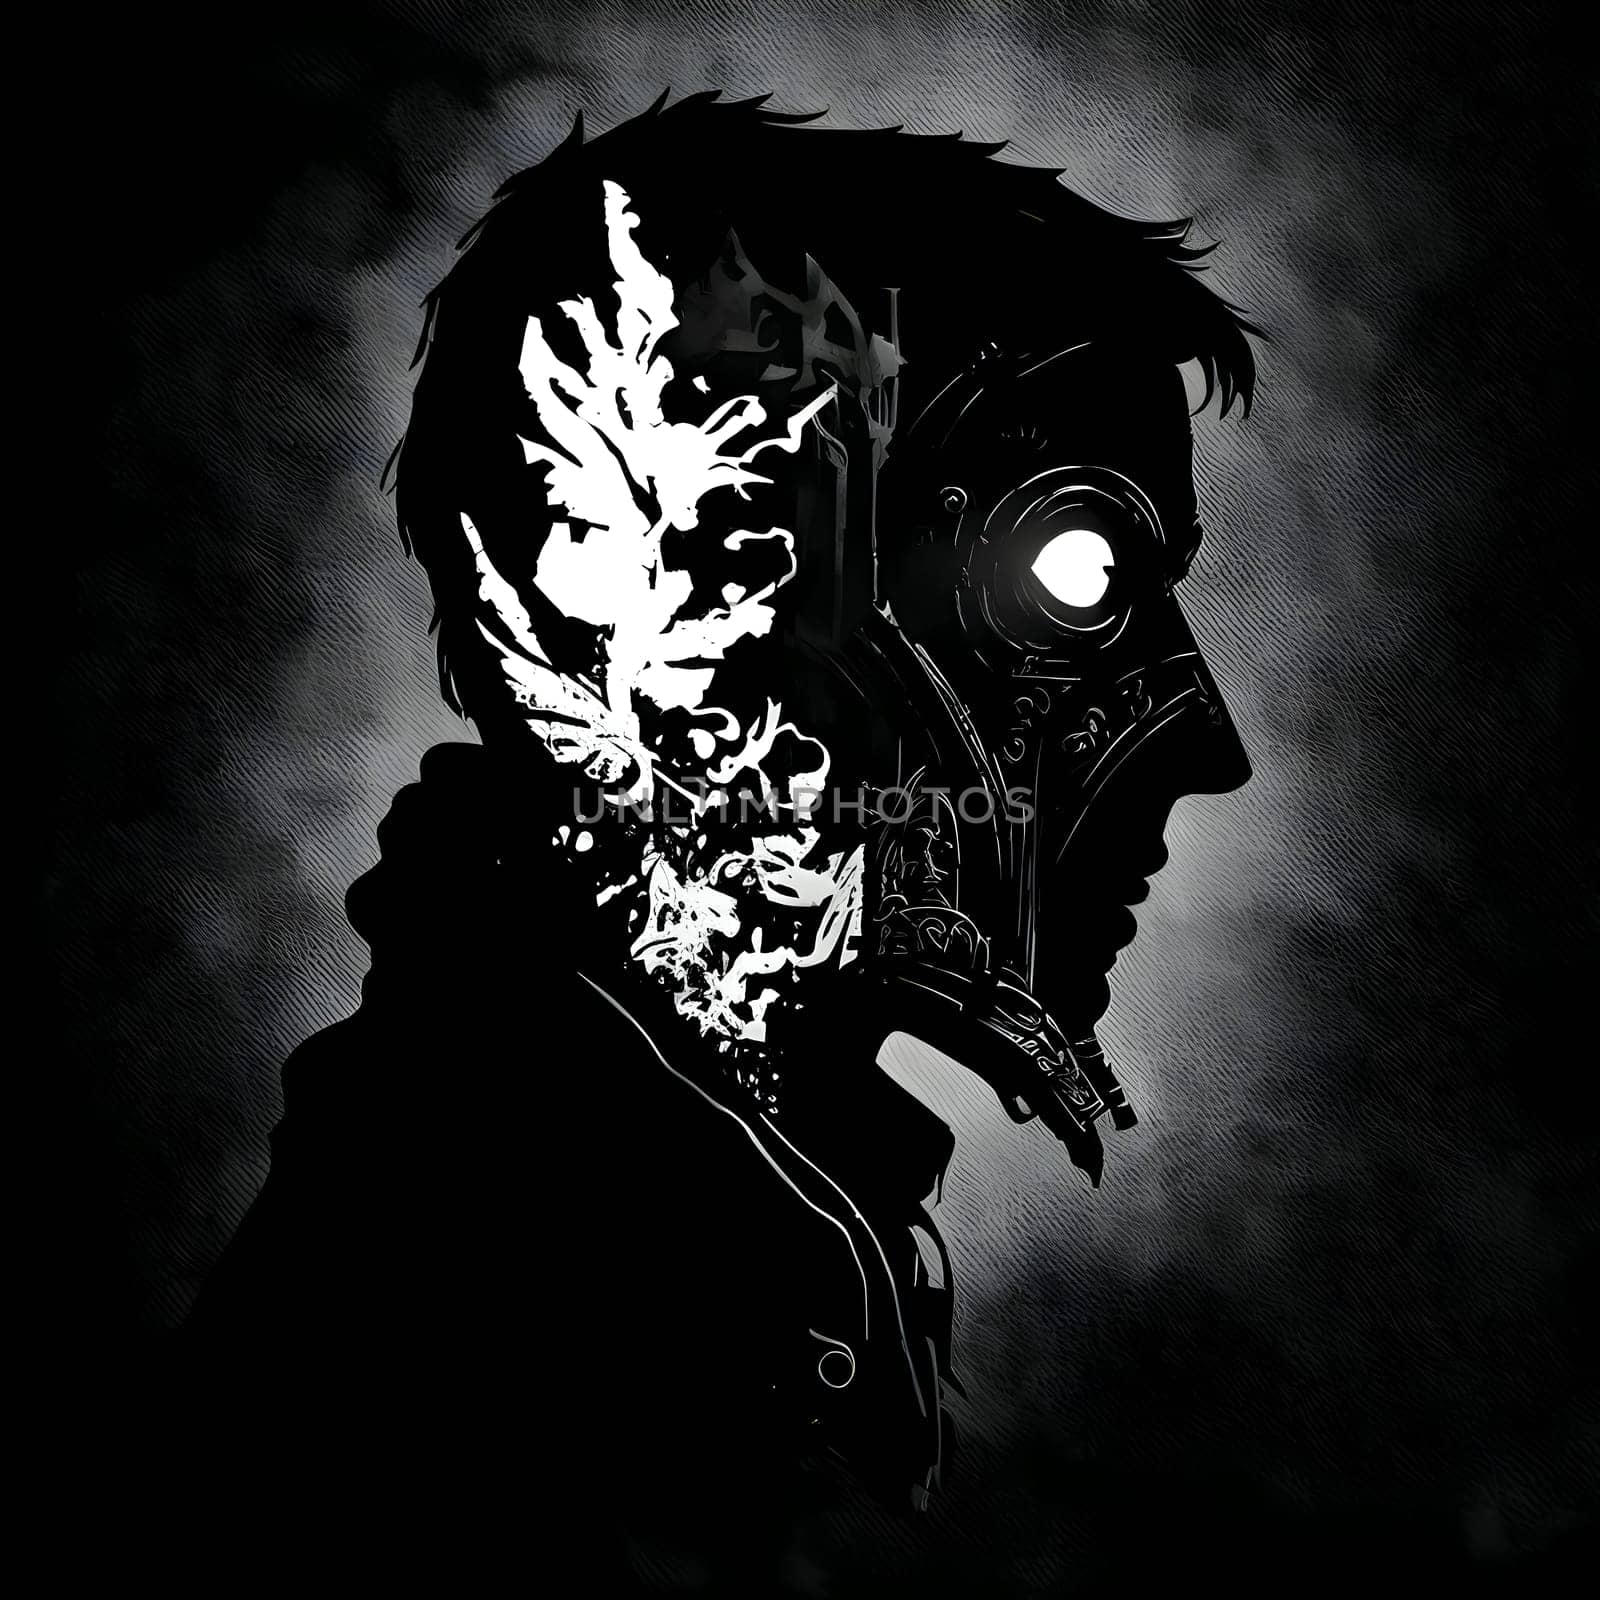 Vector illustration of a man in a mask in black silhouette against a clean dark background, capturing graceful forms.